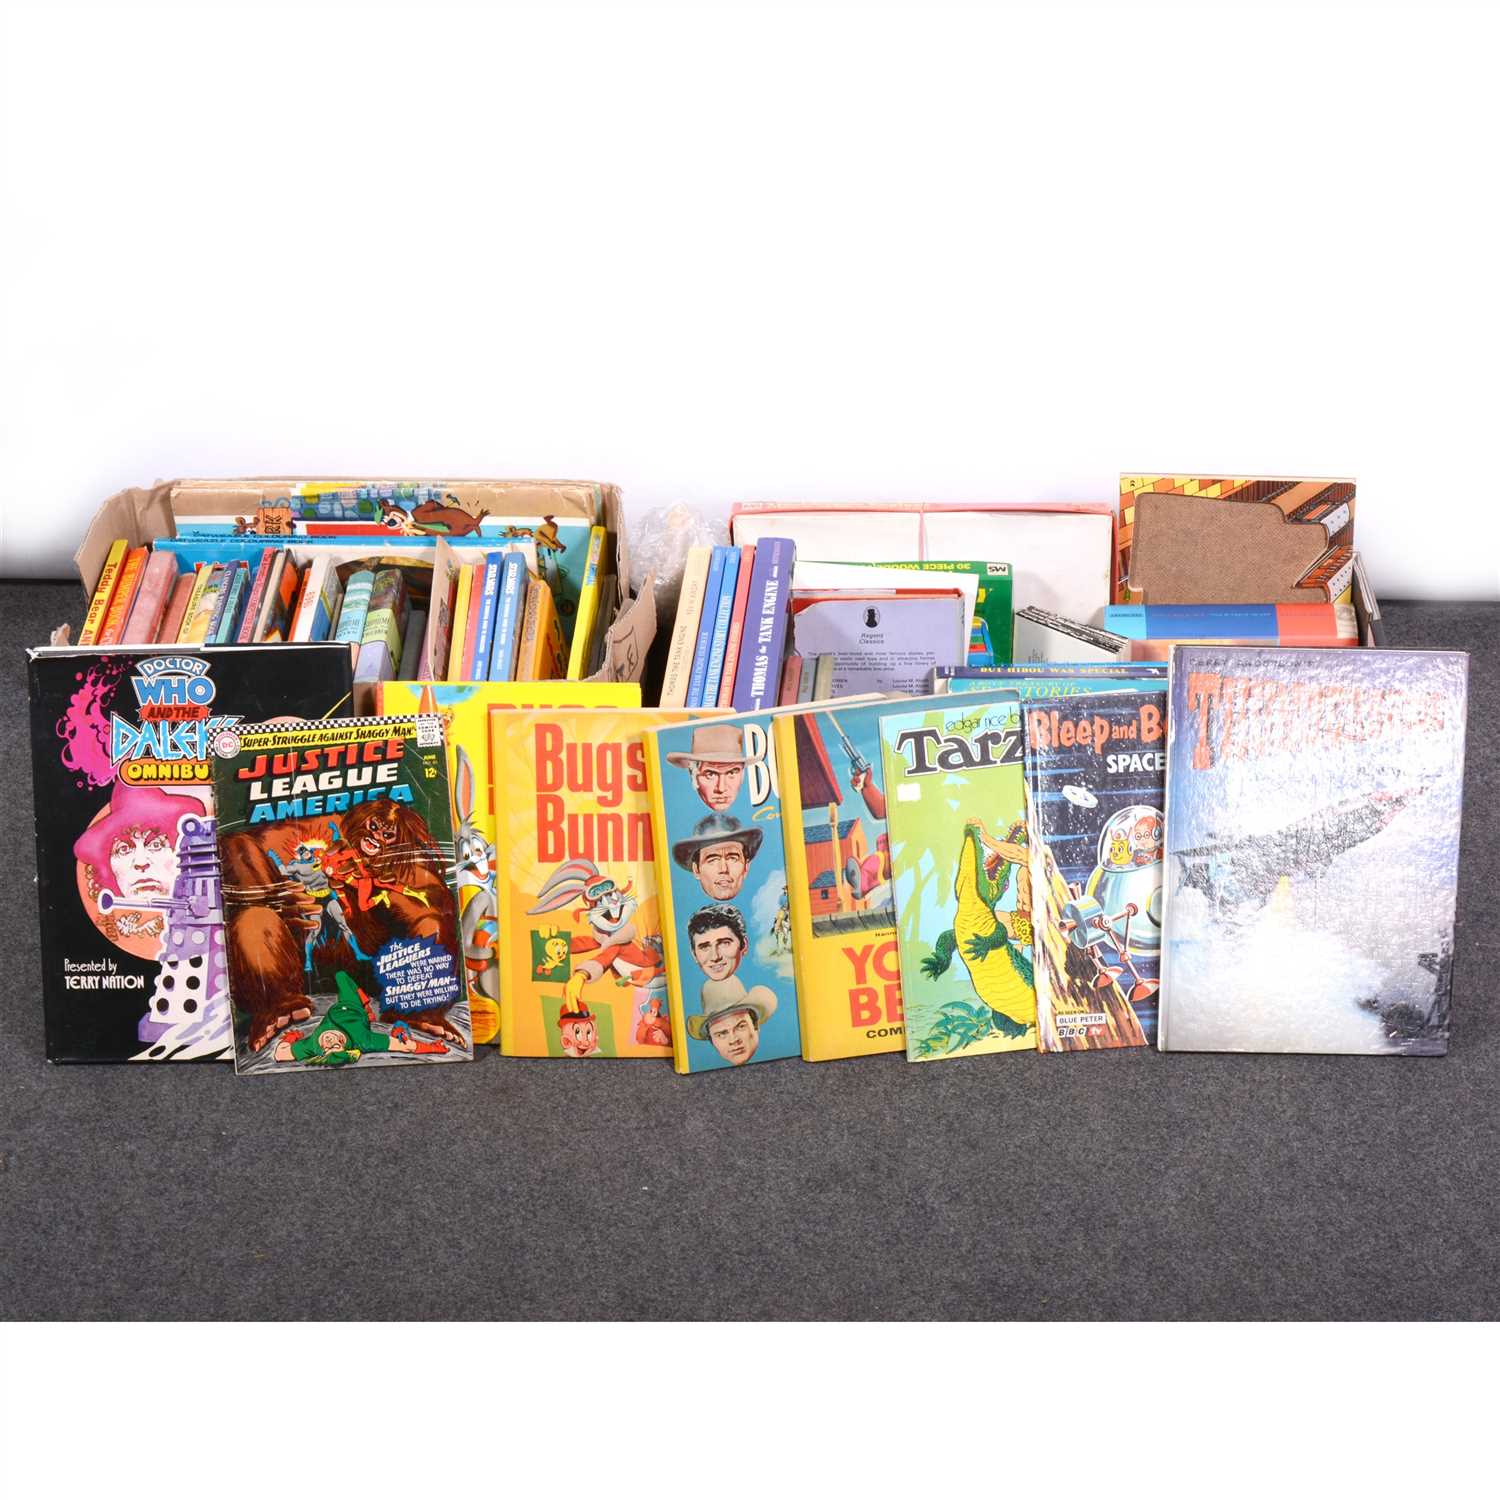 Lot 143 - Children's annuals and books, including Enid Blyton, Ladybirds books, magazines etc.